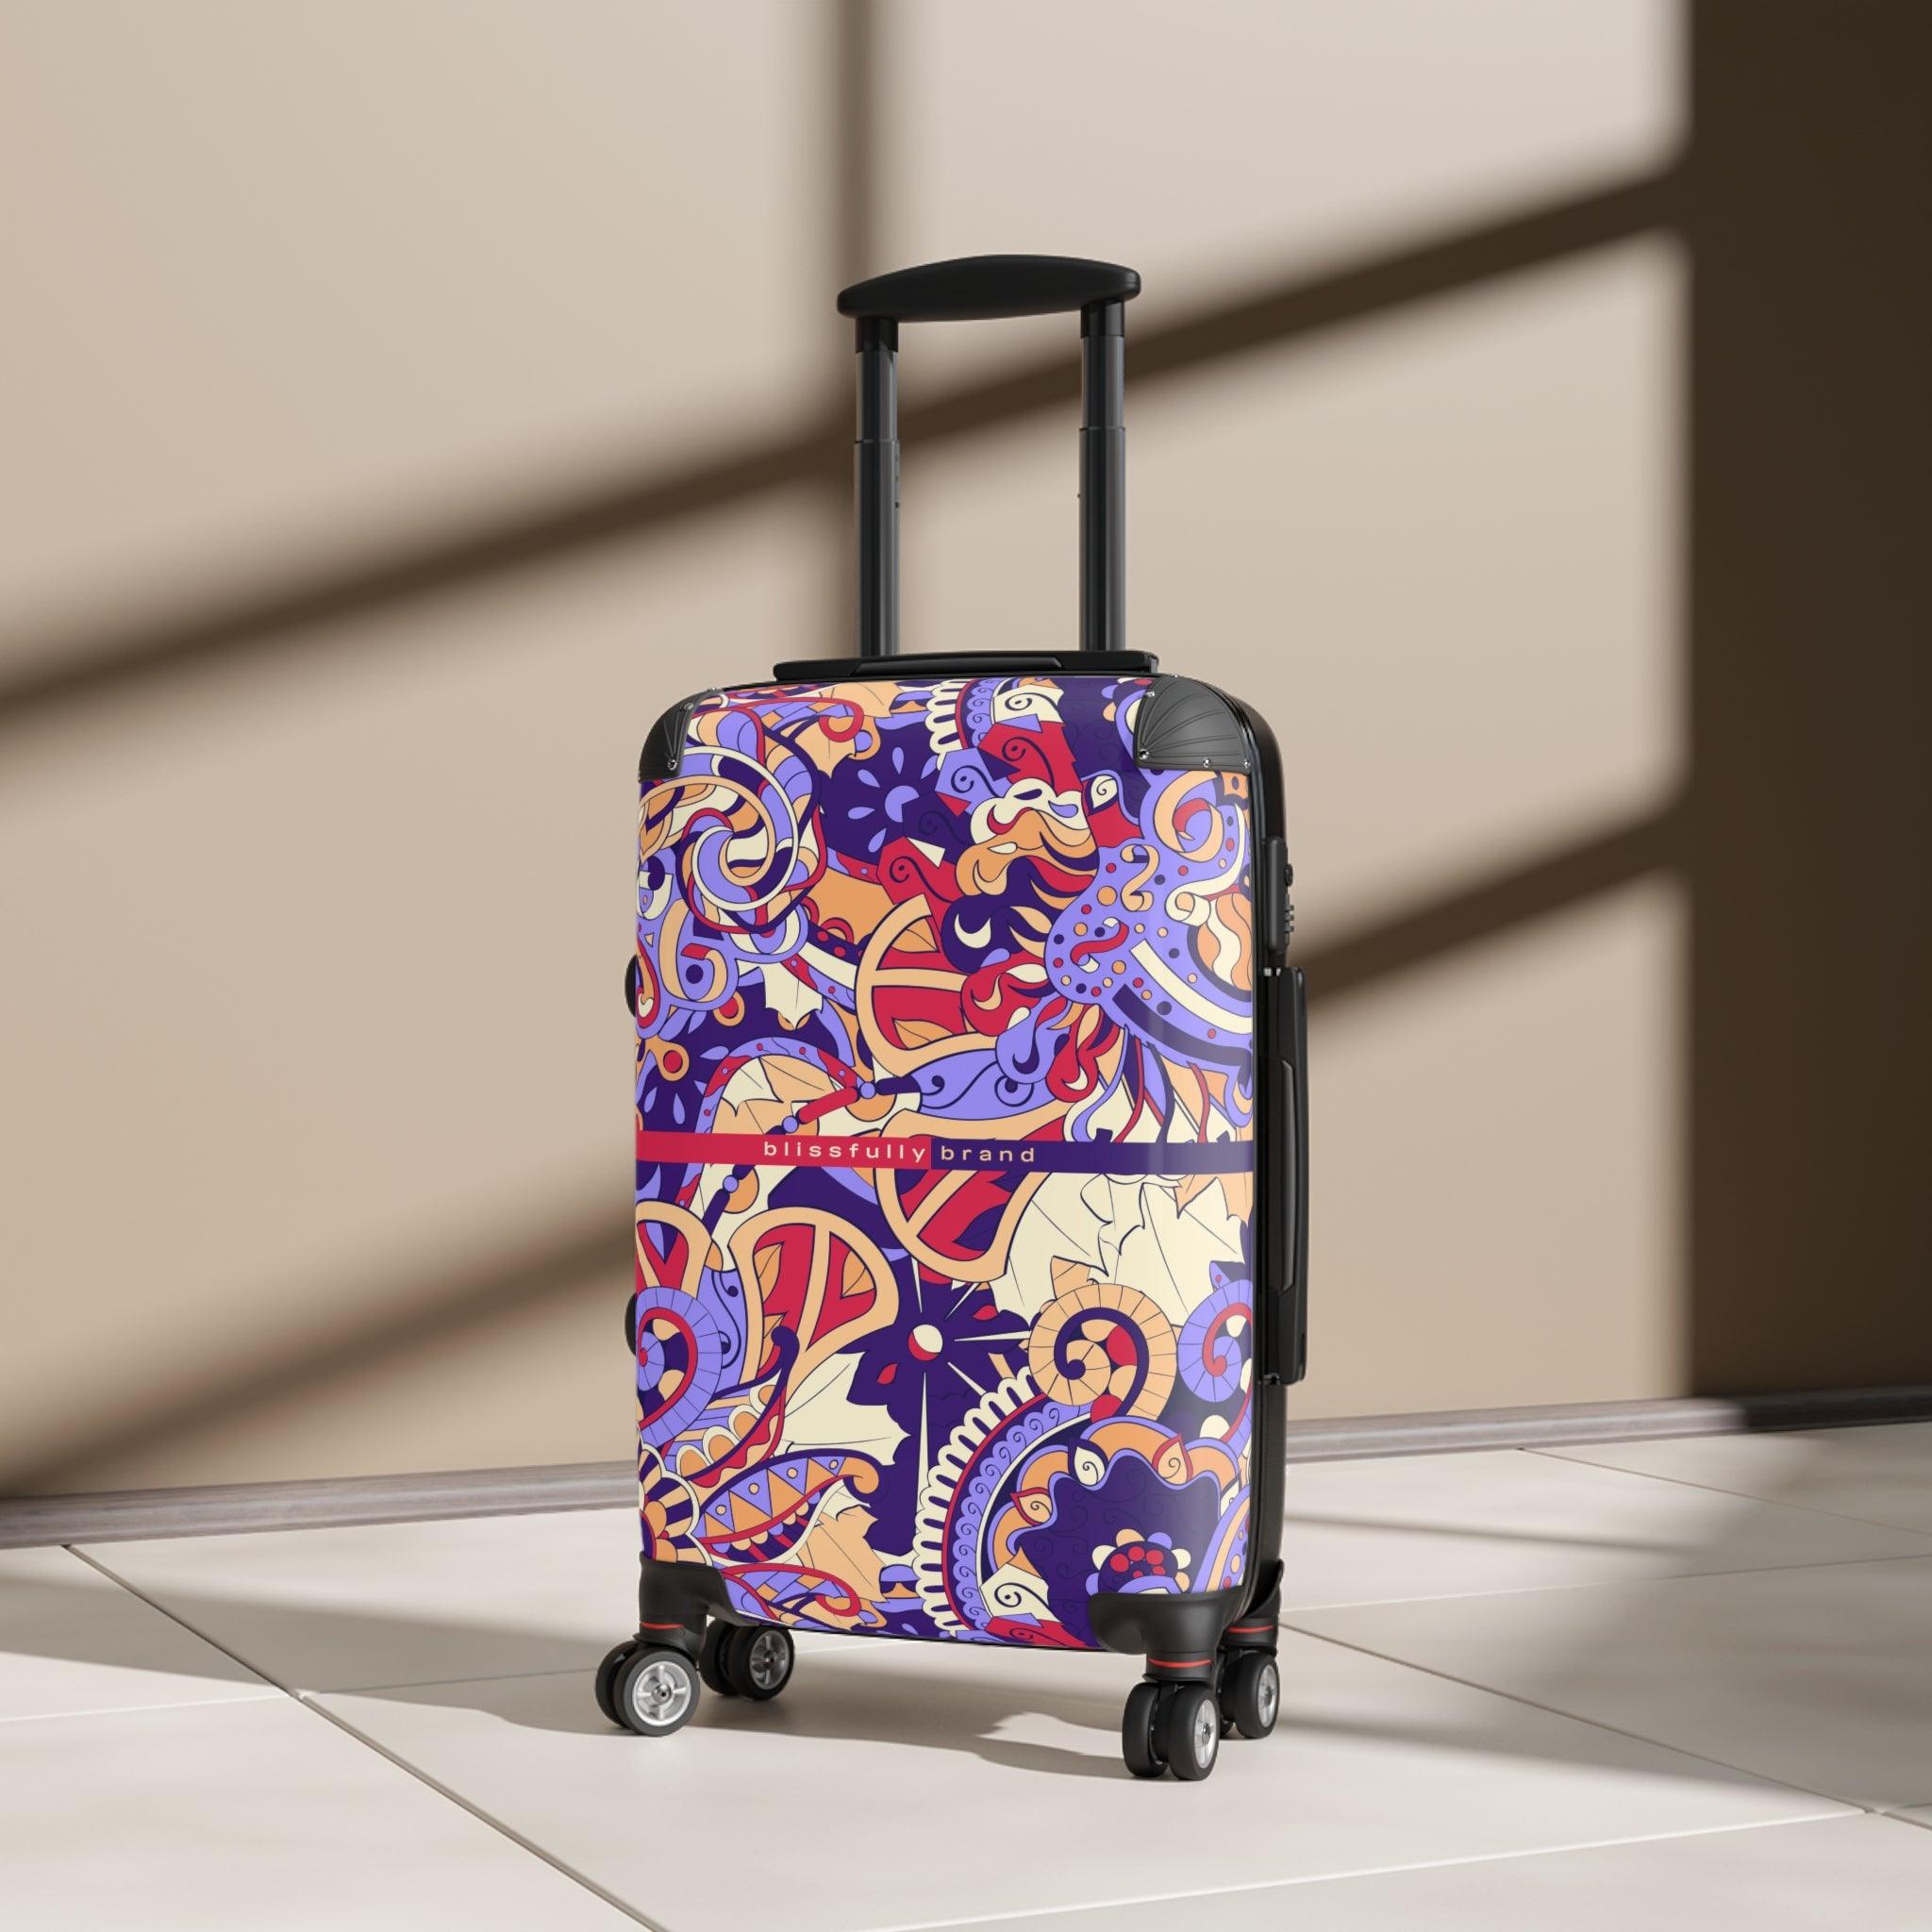 Sechie Luggage Collection - Abstract Kaleidoscope Baroque Paisley Floral Print Psychedelic Retro Swirls Funky Multicolor Check in Carry On Roller 360 Hard Shell Unique Retro Vibrant Bold Eclectic Boho Chic Blue